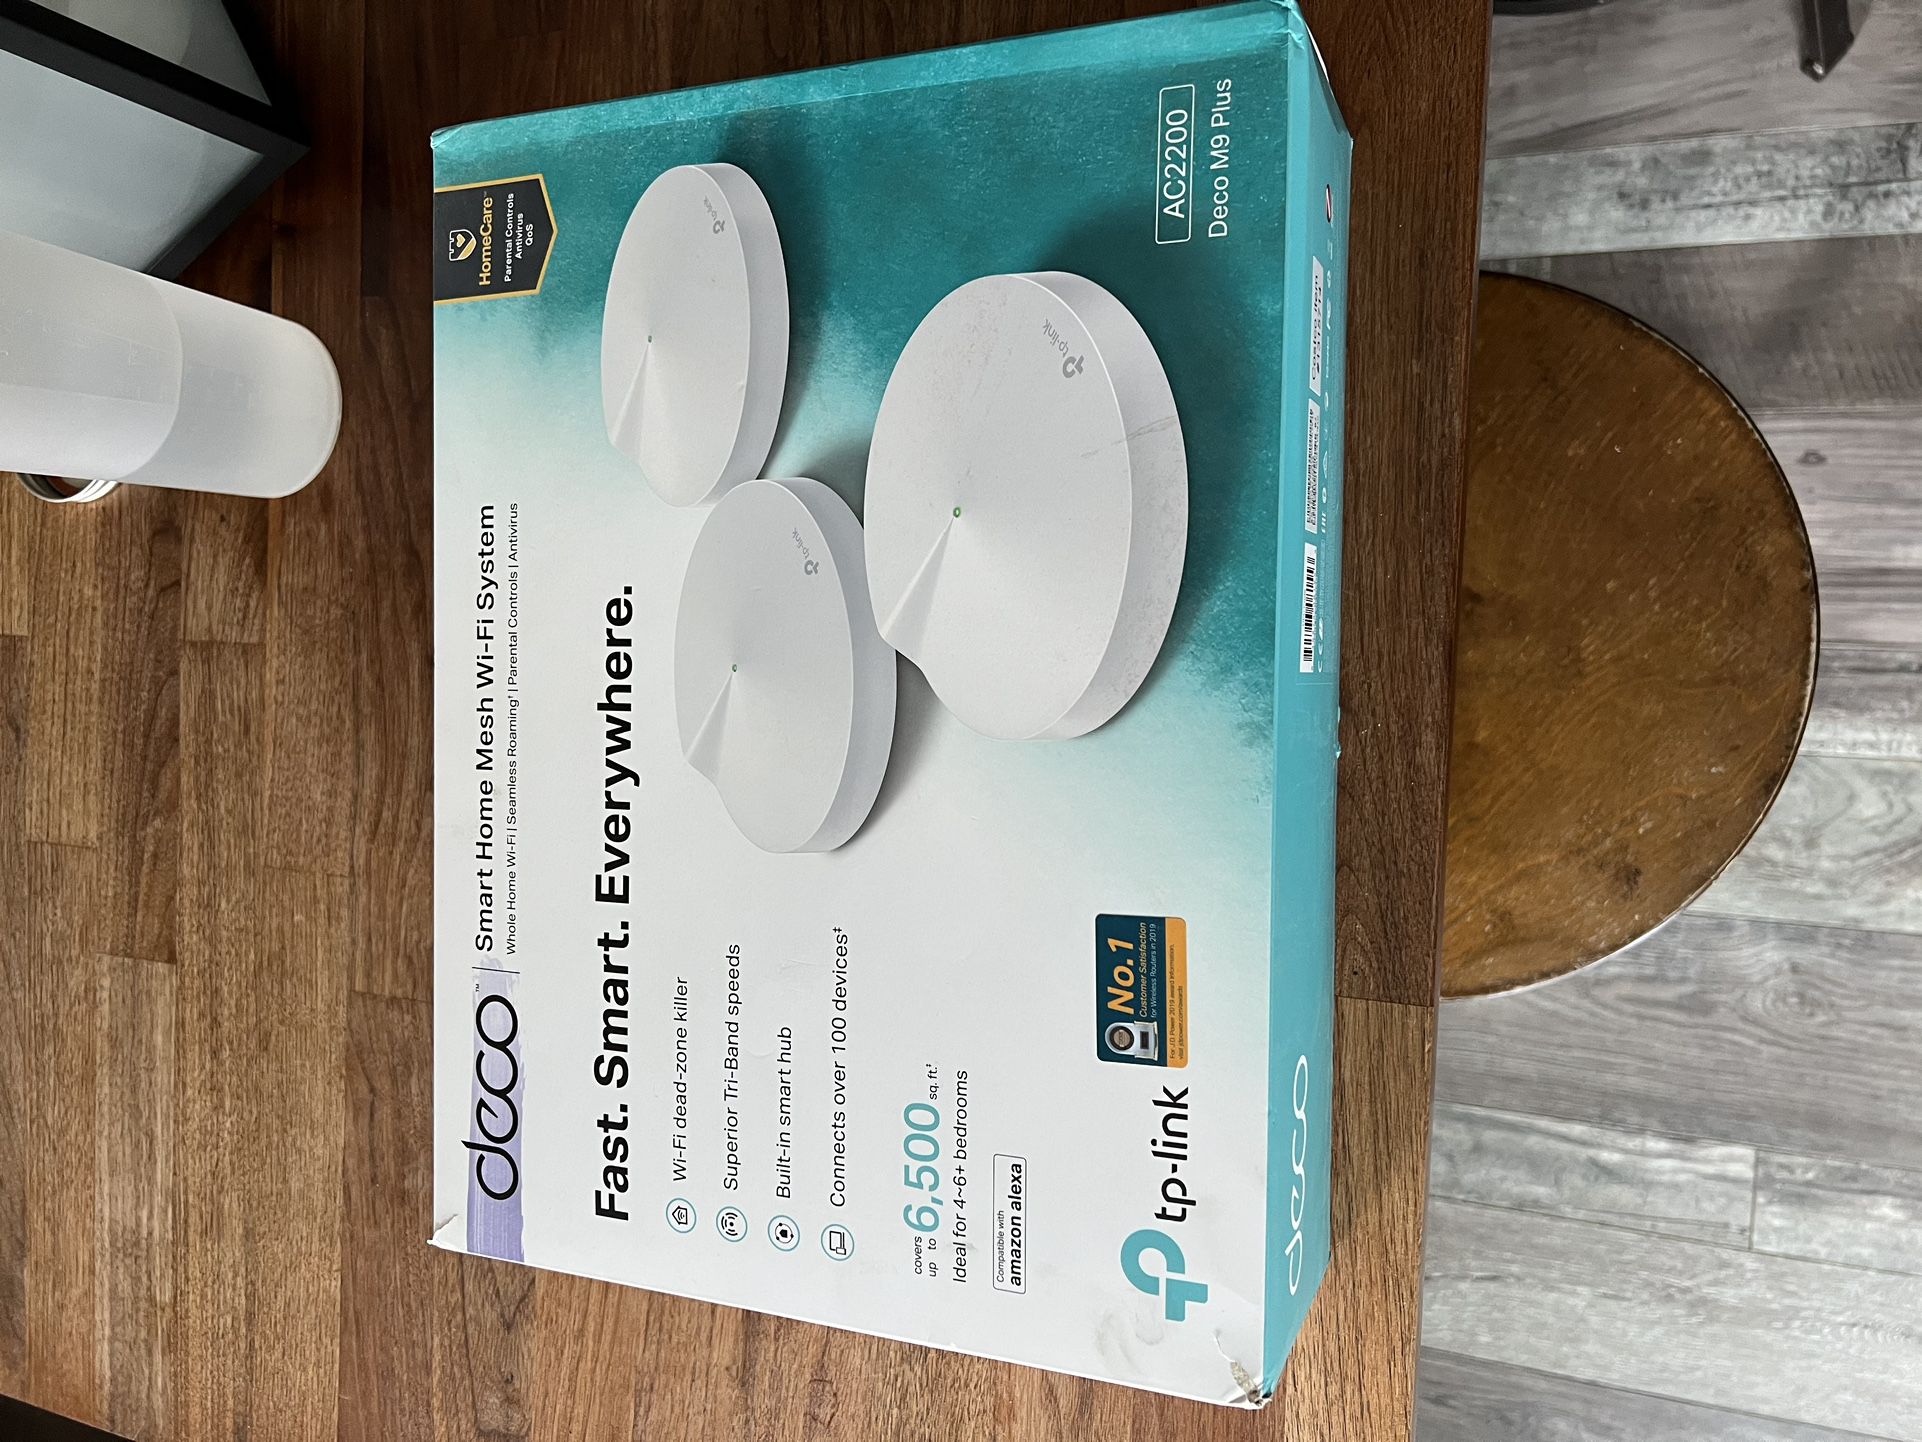 Deco M9 Plus (AC2200) Mesh Wifi Router System Perfect Condition 